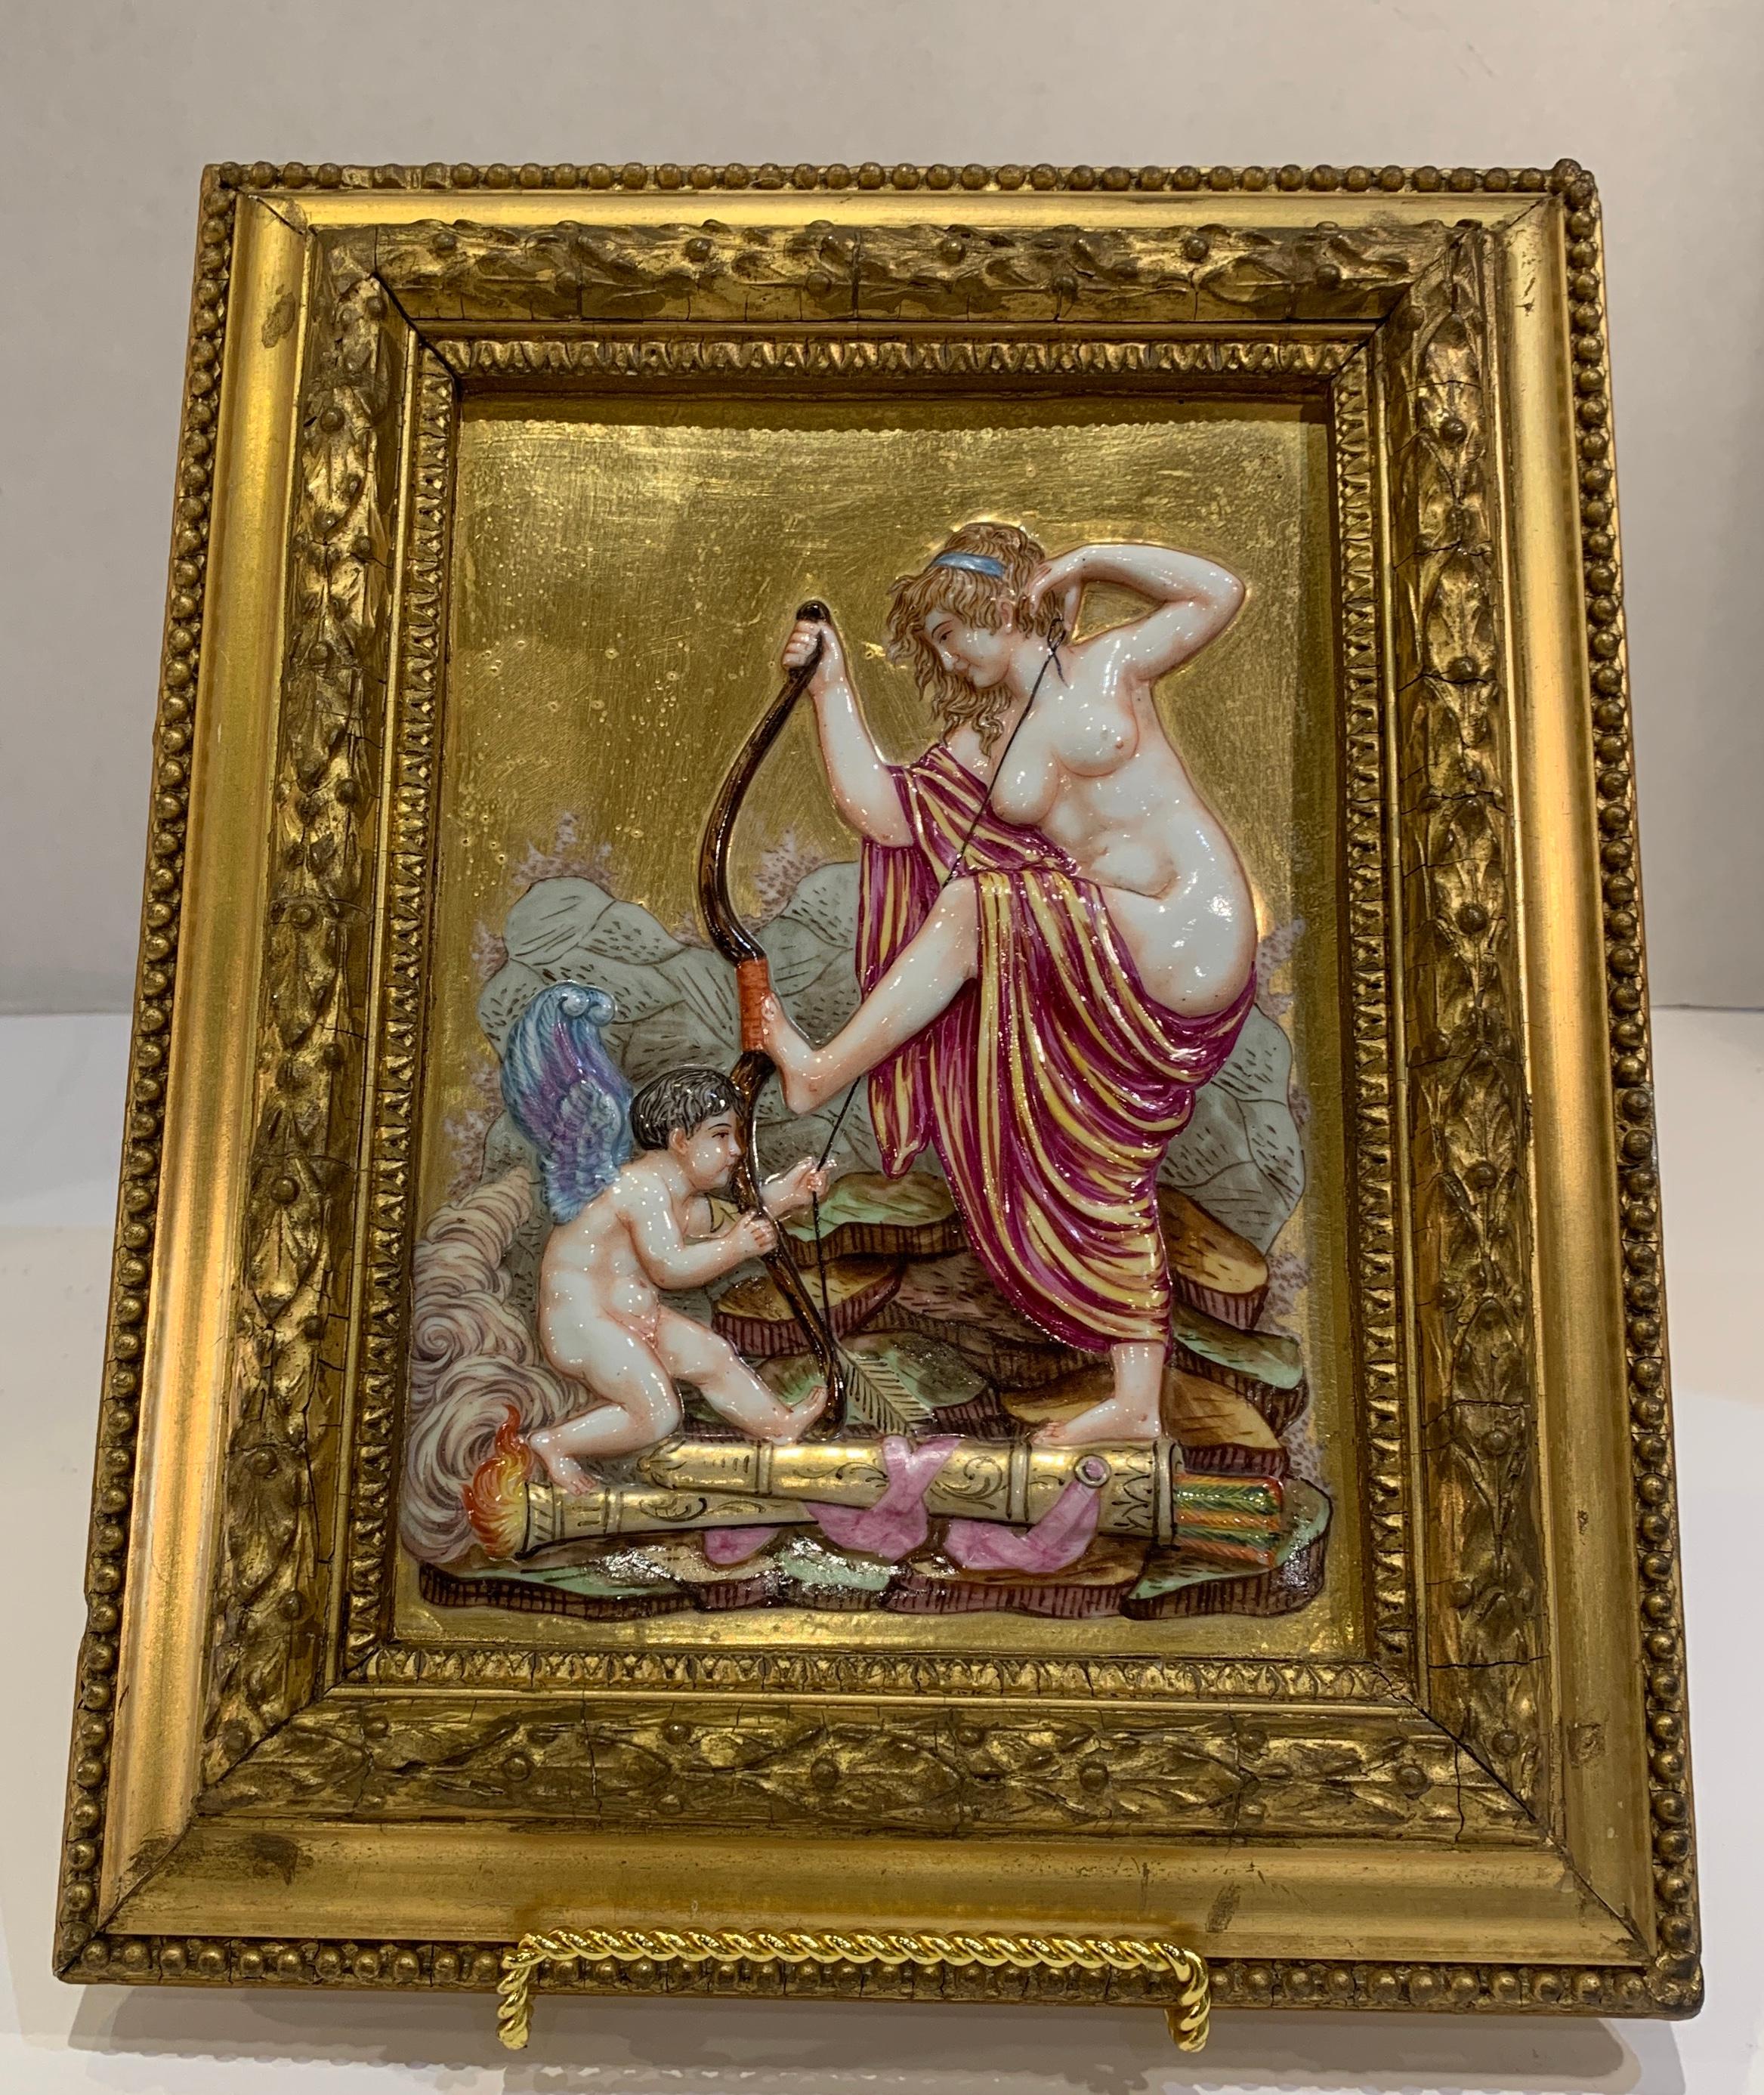 Opulent, antique, handmade, superbly hand painted Capodimonte porcelain plaques from the nineteenth century depict ancient mythological scenes, with cherubs and nymphs. The plaques are cast in exquisitely detailed high relief with lush and subtly